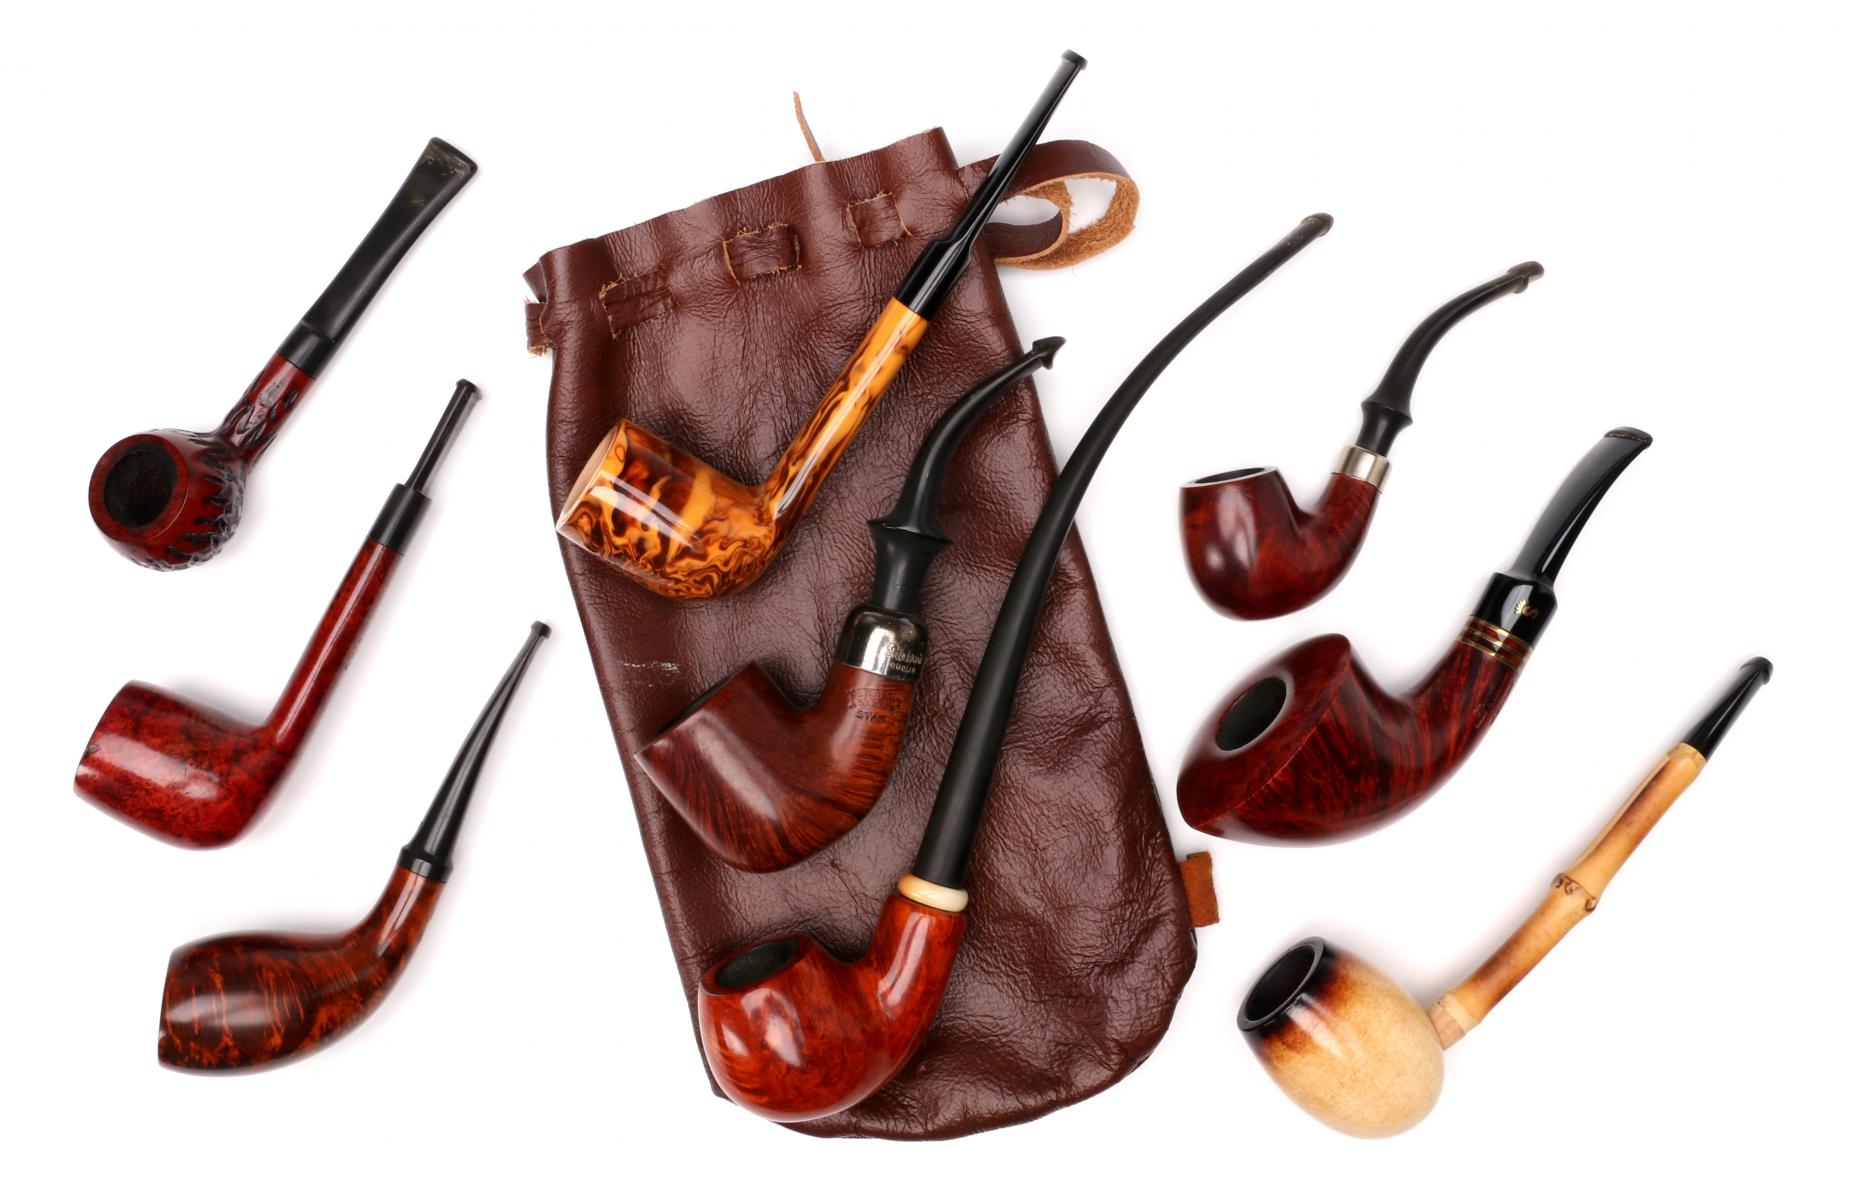 A COLLECTION OF QUALITY EXOTIC WOOD SMOKING PIPES